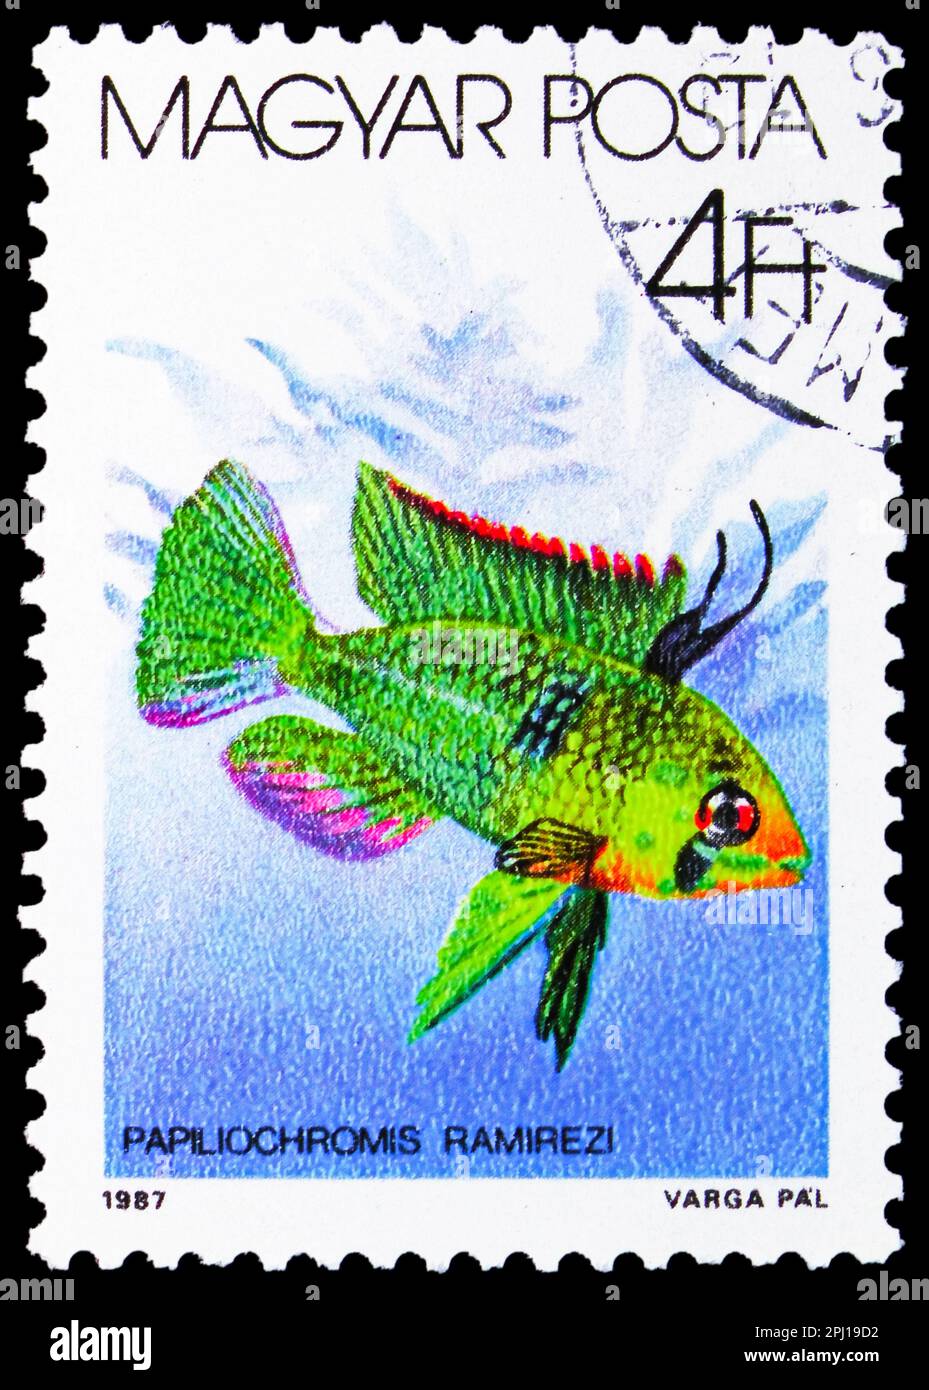 MOSCOW, RUSSIA - MARCH 25, 2023: Postage stamp printed in Hungary shows Ram (Papiliochromis ramirezi), Fishes (1987) serie, circa 1987 Stock Photo